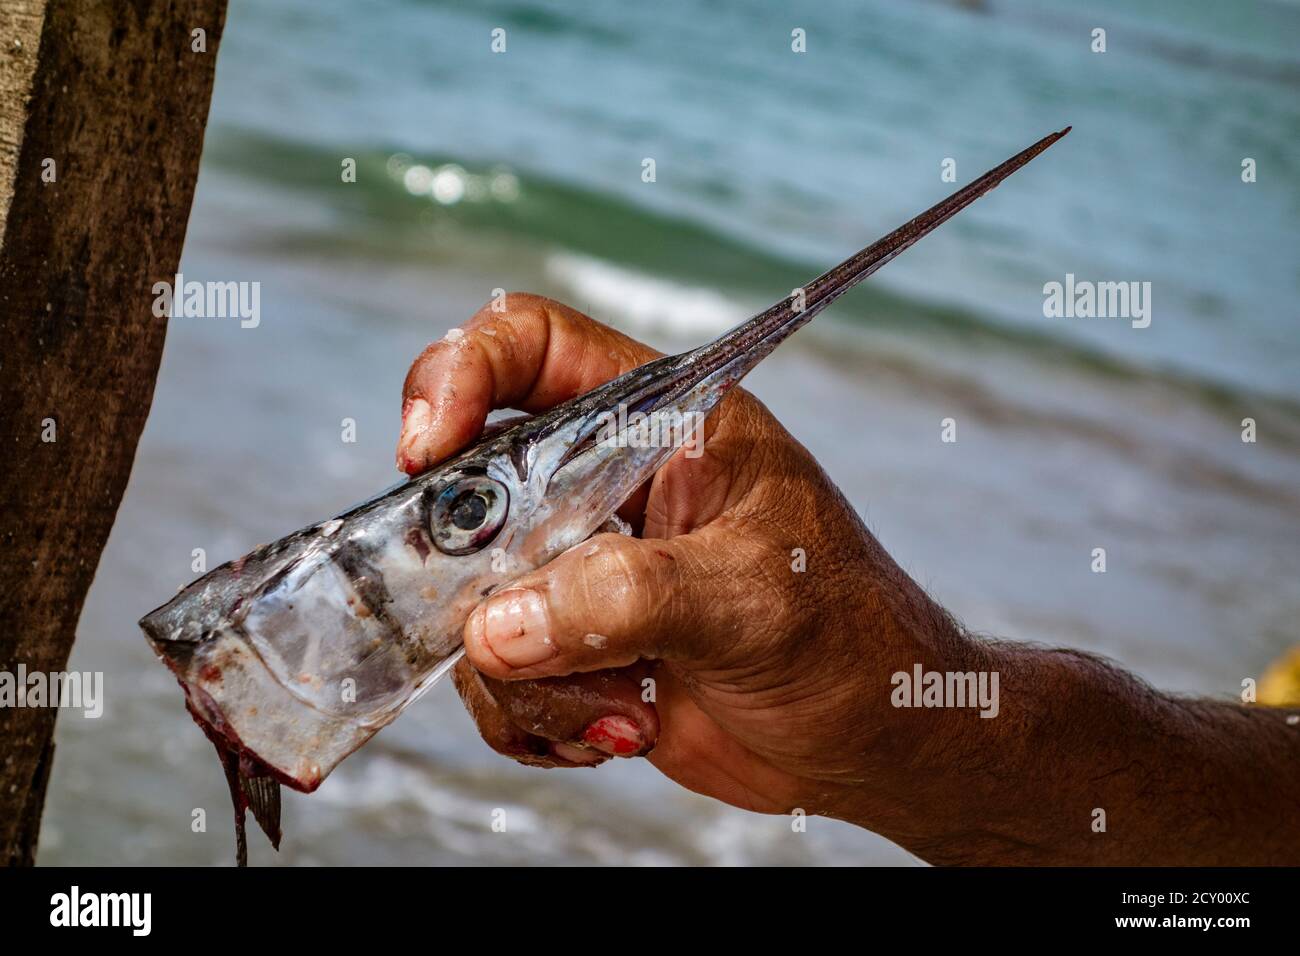 A fisherman holds the removed head of a needle-nose fish he has just caught Stock Photo